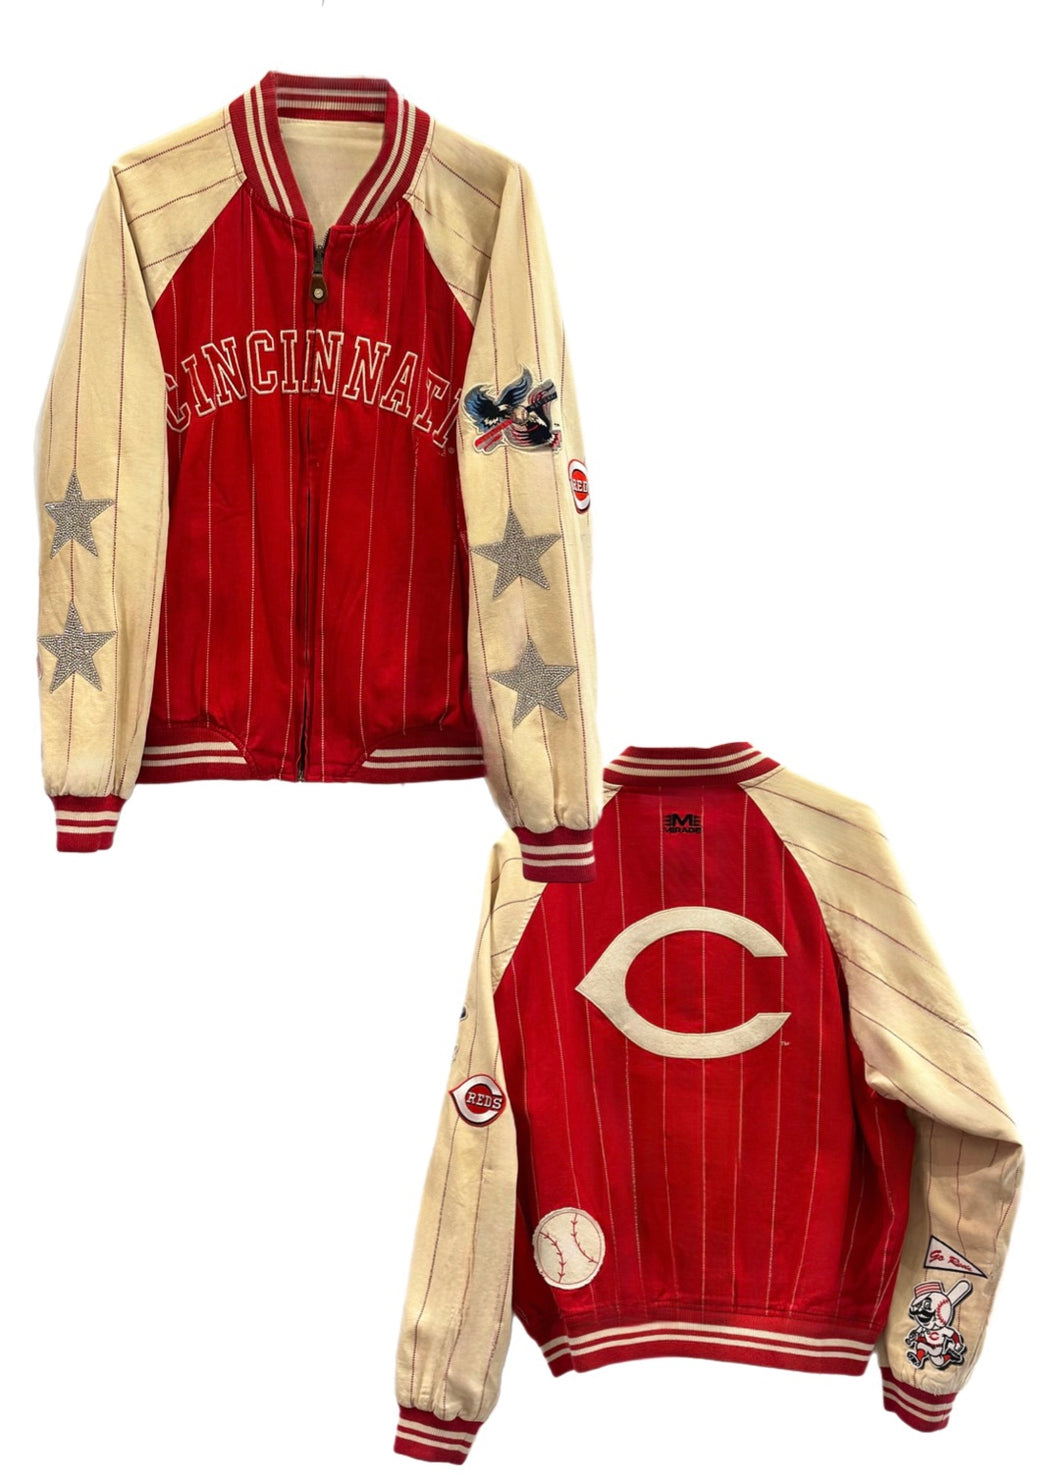 Cincinnati Reds, MLB One of a KIND Vintage Jacket with Crystal Star Design & Patches